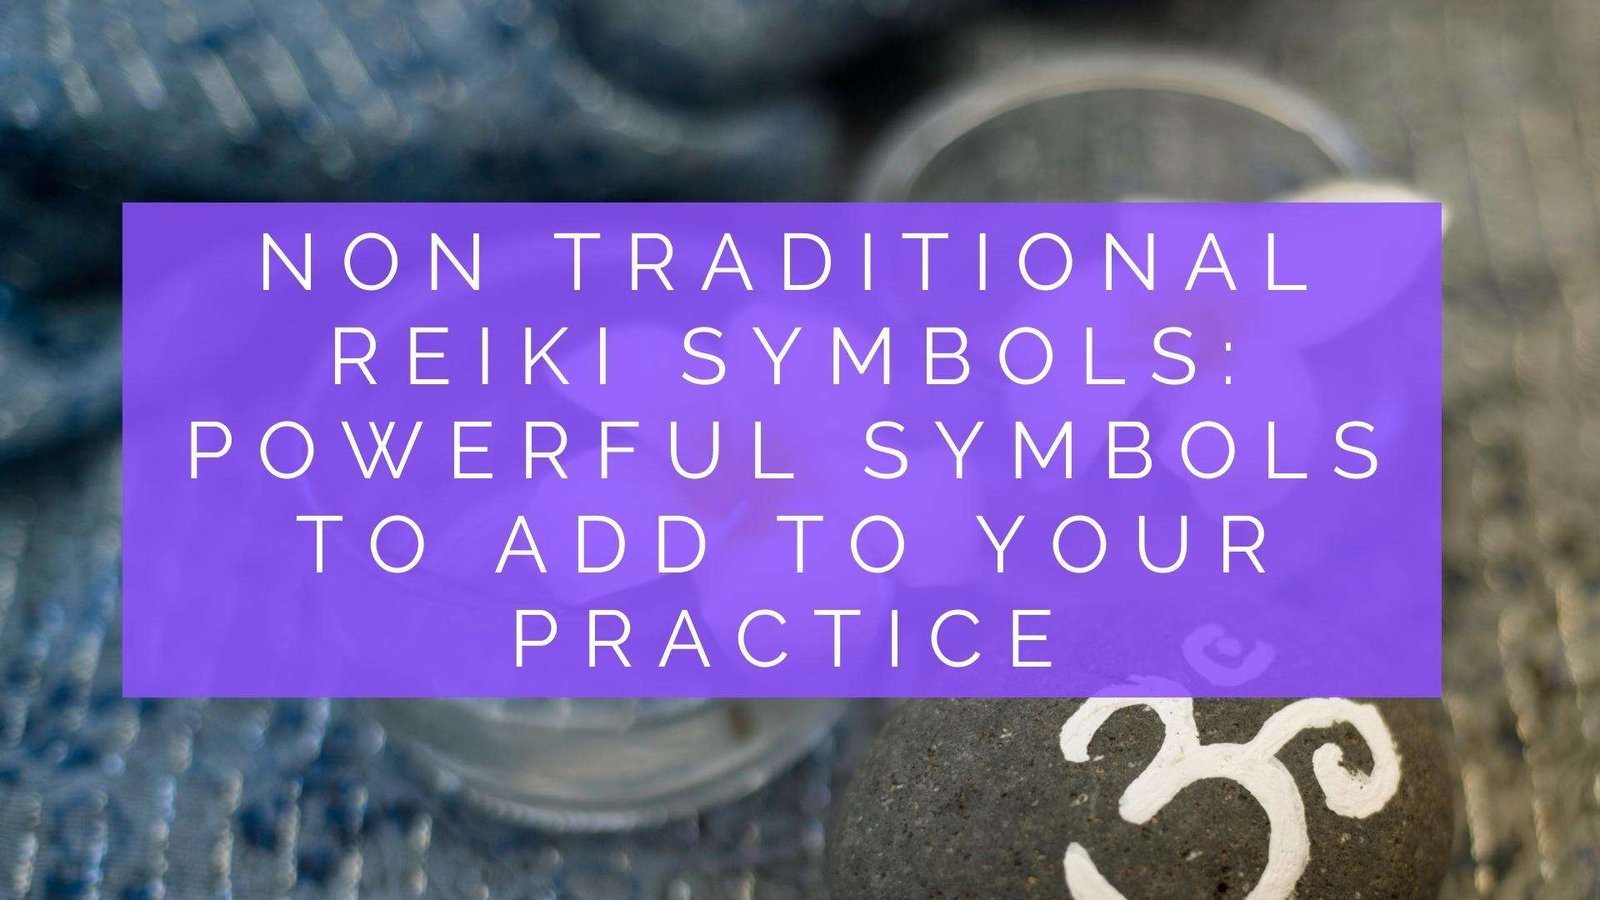 Non Traditional Reiki Symbols: Powerful Symbols to Add to Your Practice